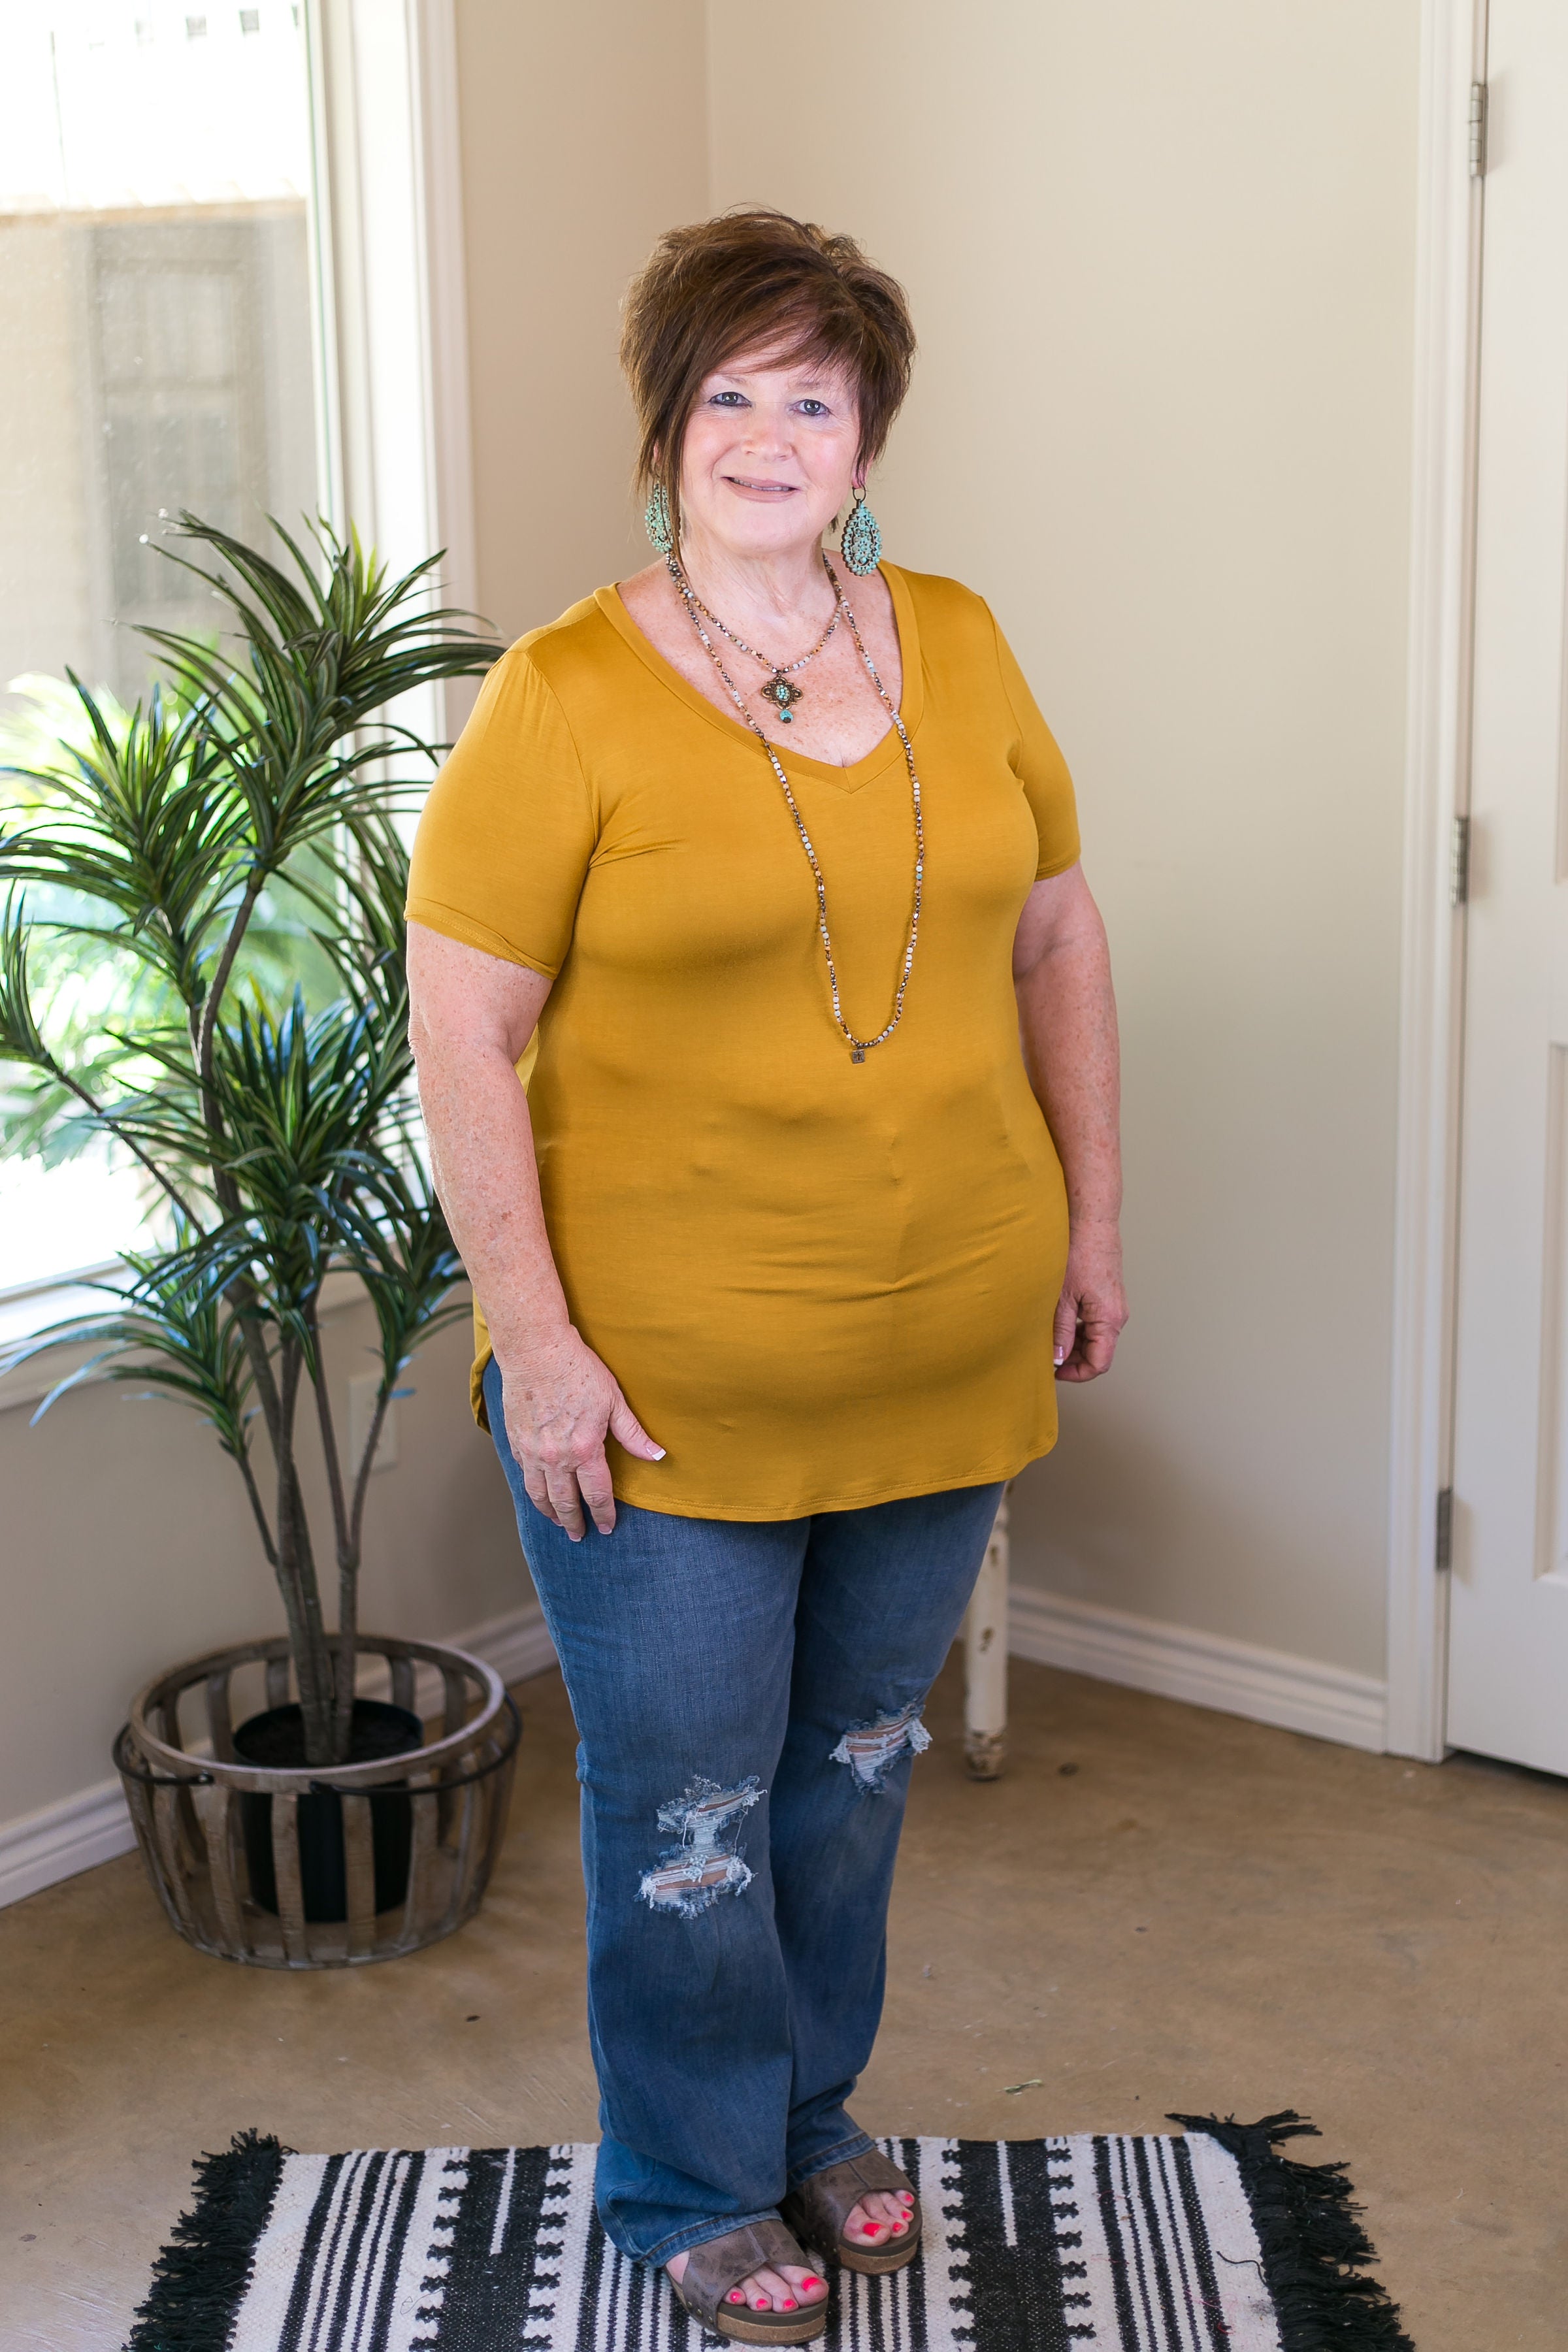 Simply The Best V Neck Short Sleeve Tee Shirt in Mustard Yellow - Giddy Up Glamour Boutique